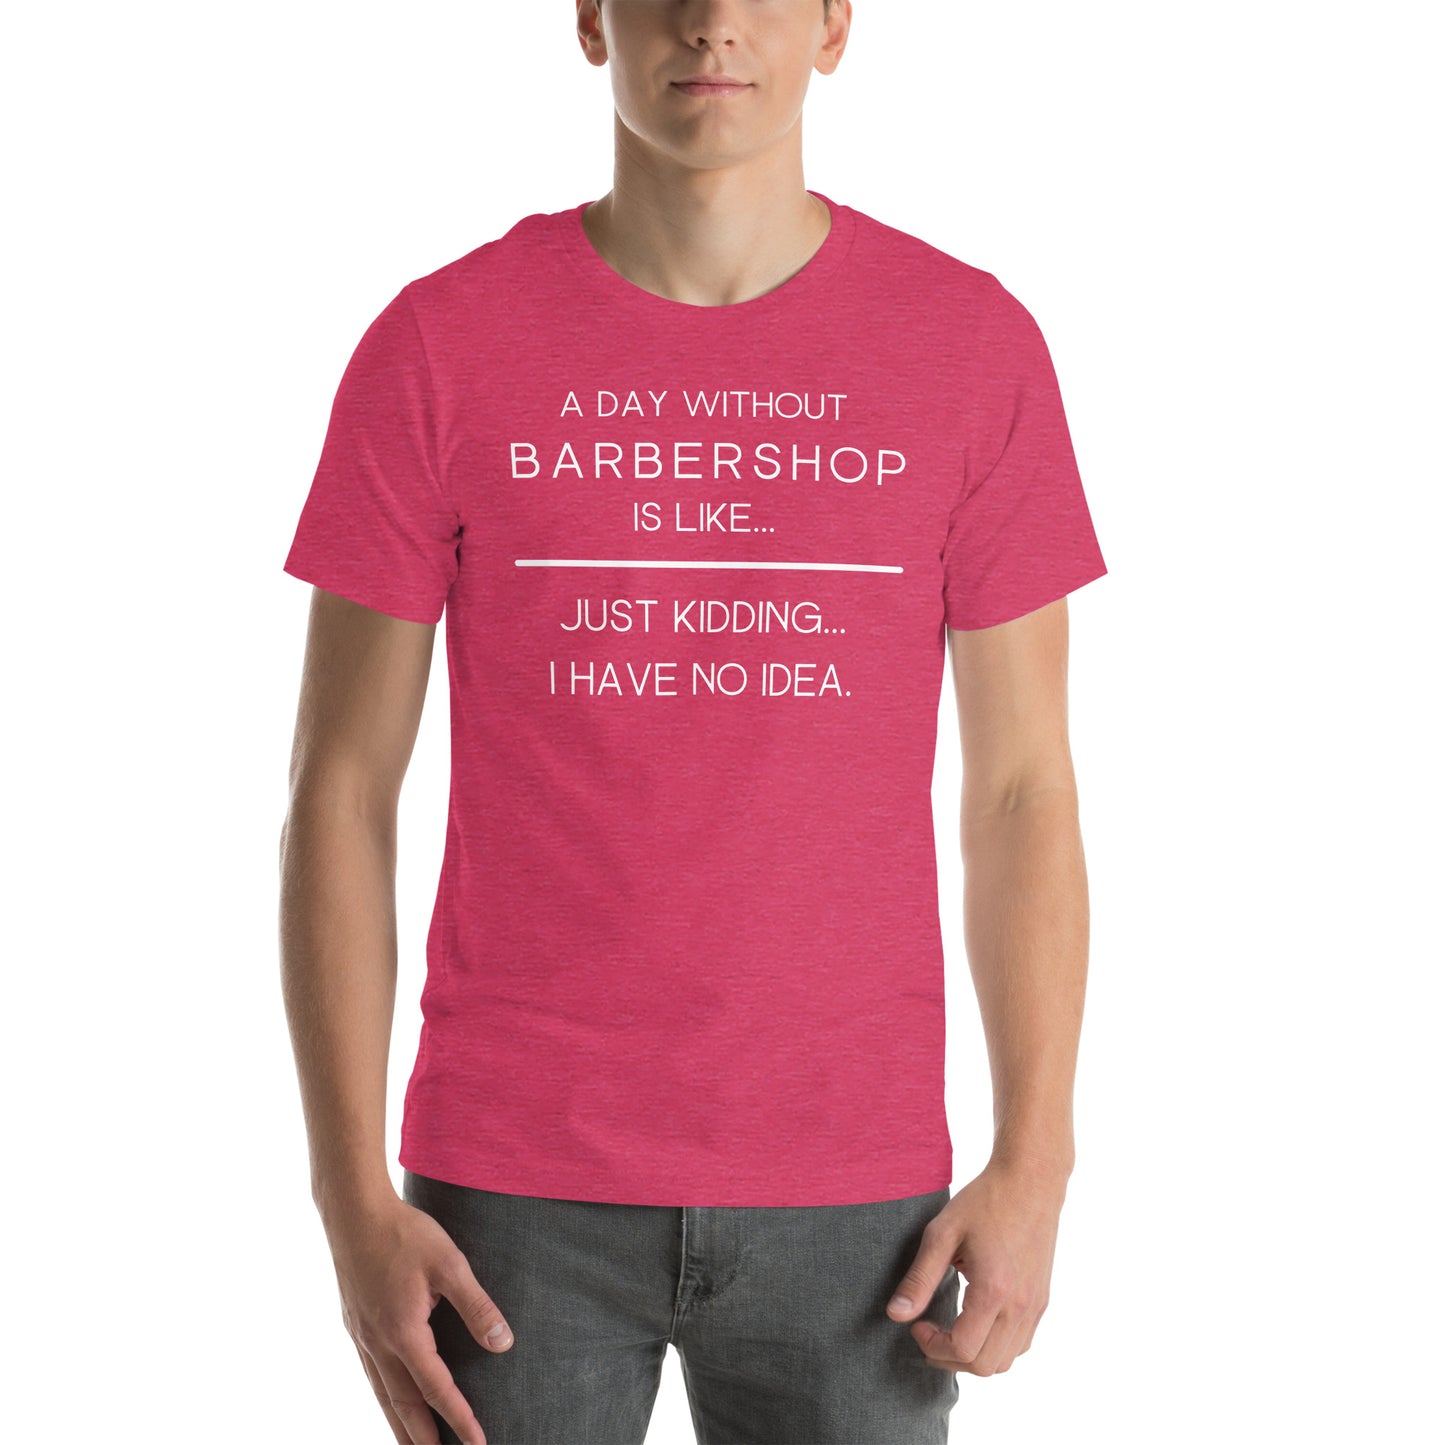 A Day without Barbershop - Printed Unisex t-shirt